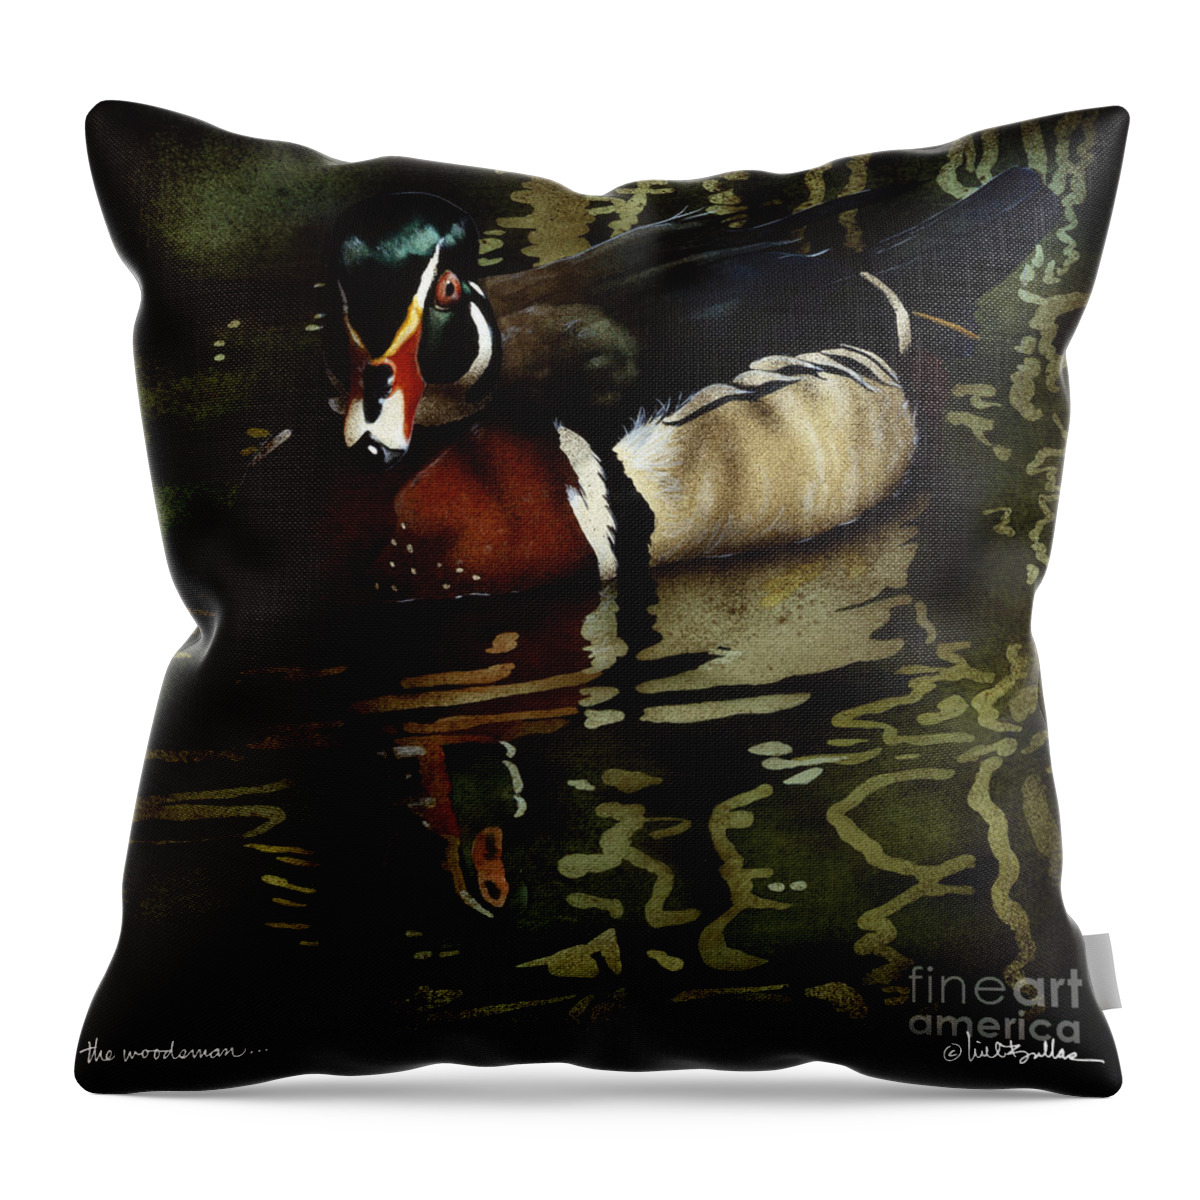 Will Bullas Throw Pillow featuring the painting The Woodsman... by Will Bullas